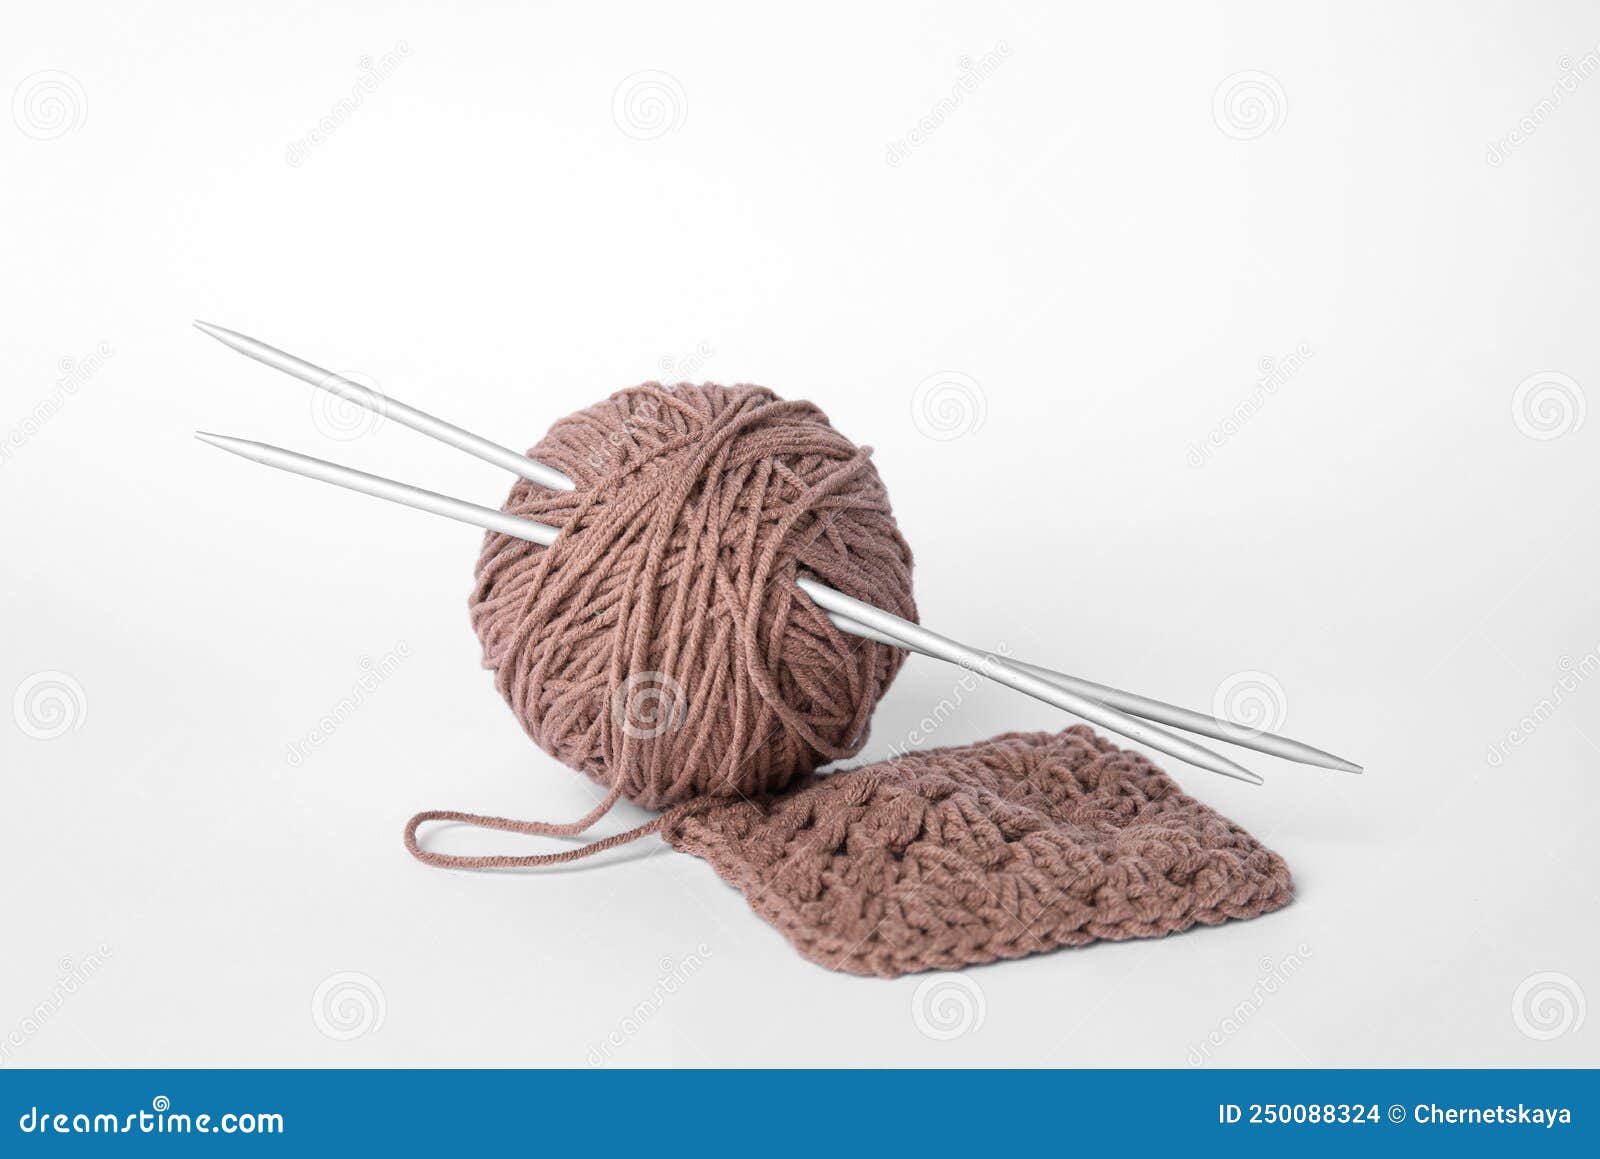 Soft Brown Woolen Yarn, Knitting and Metal Needles on White Background ...